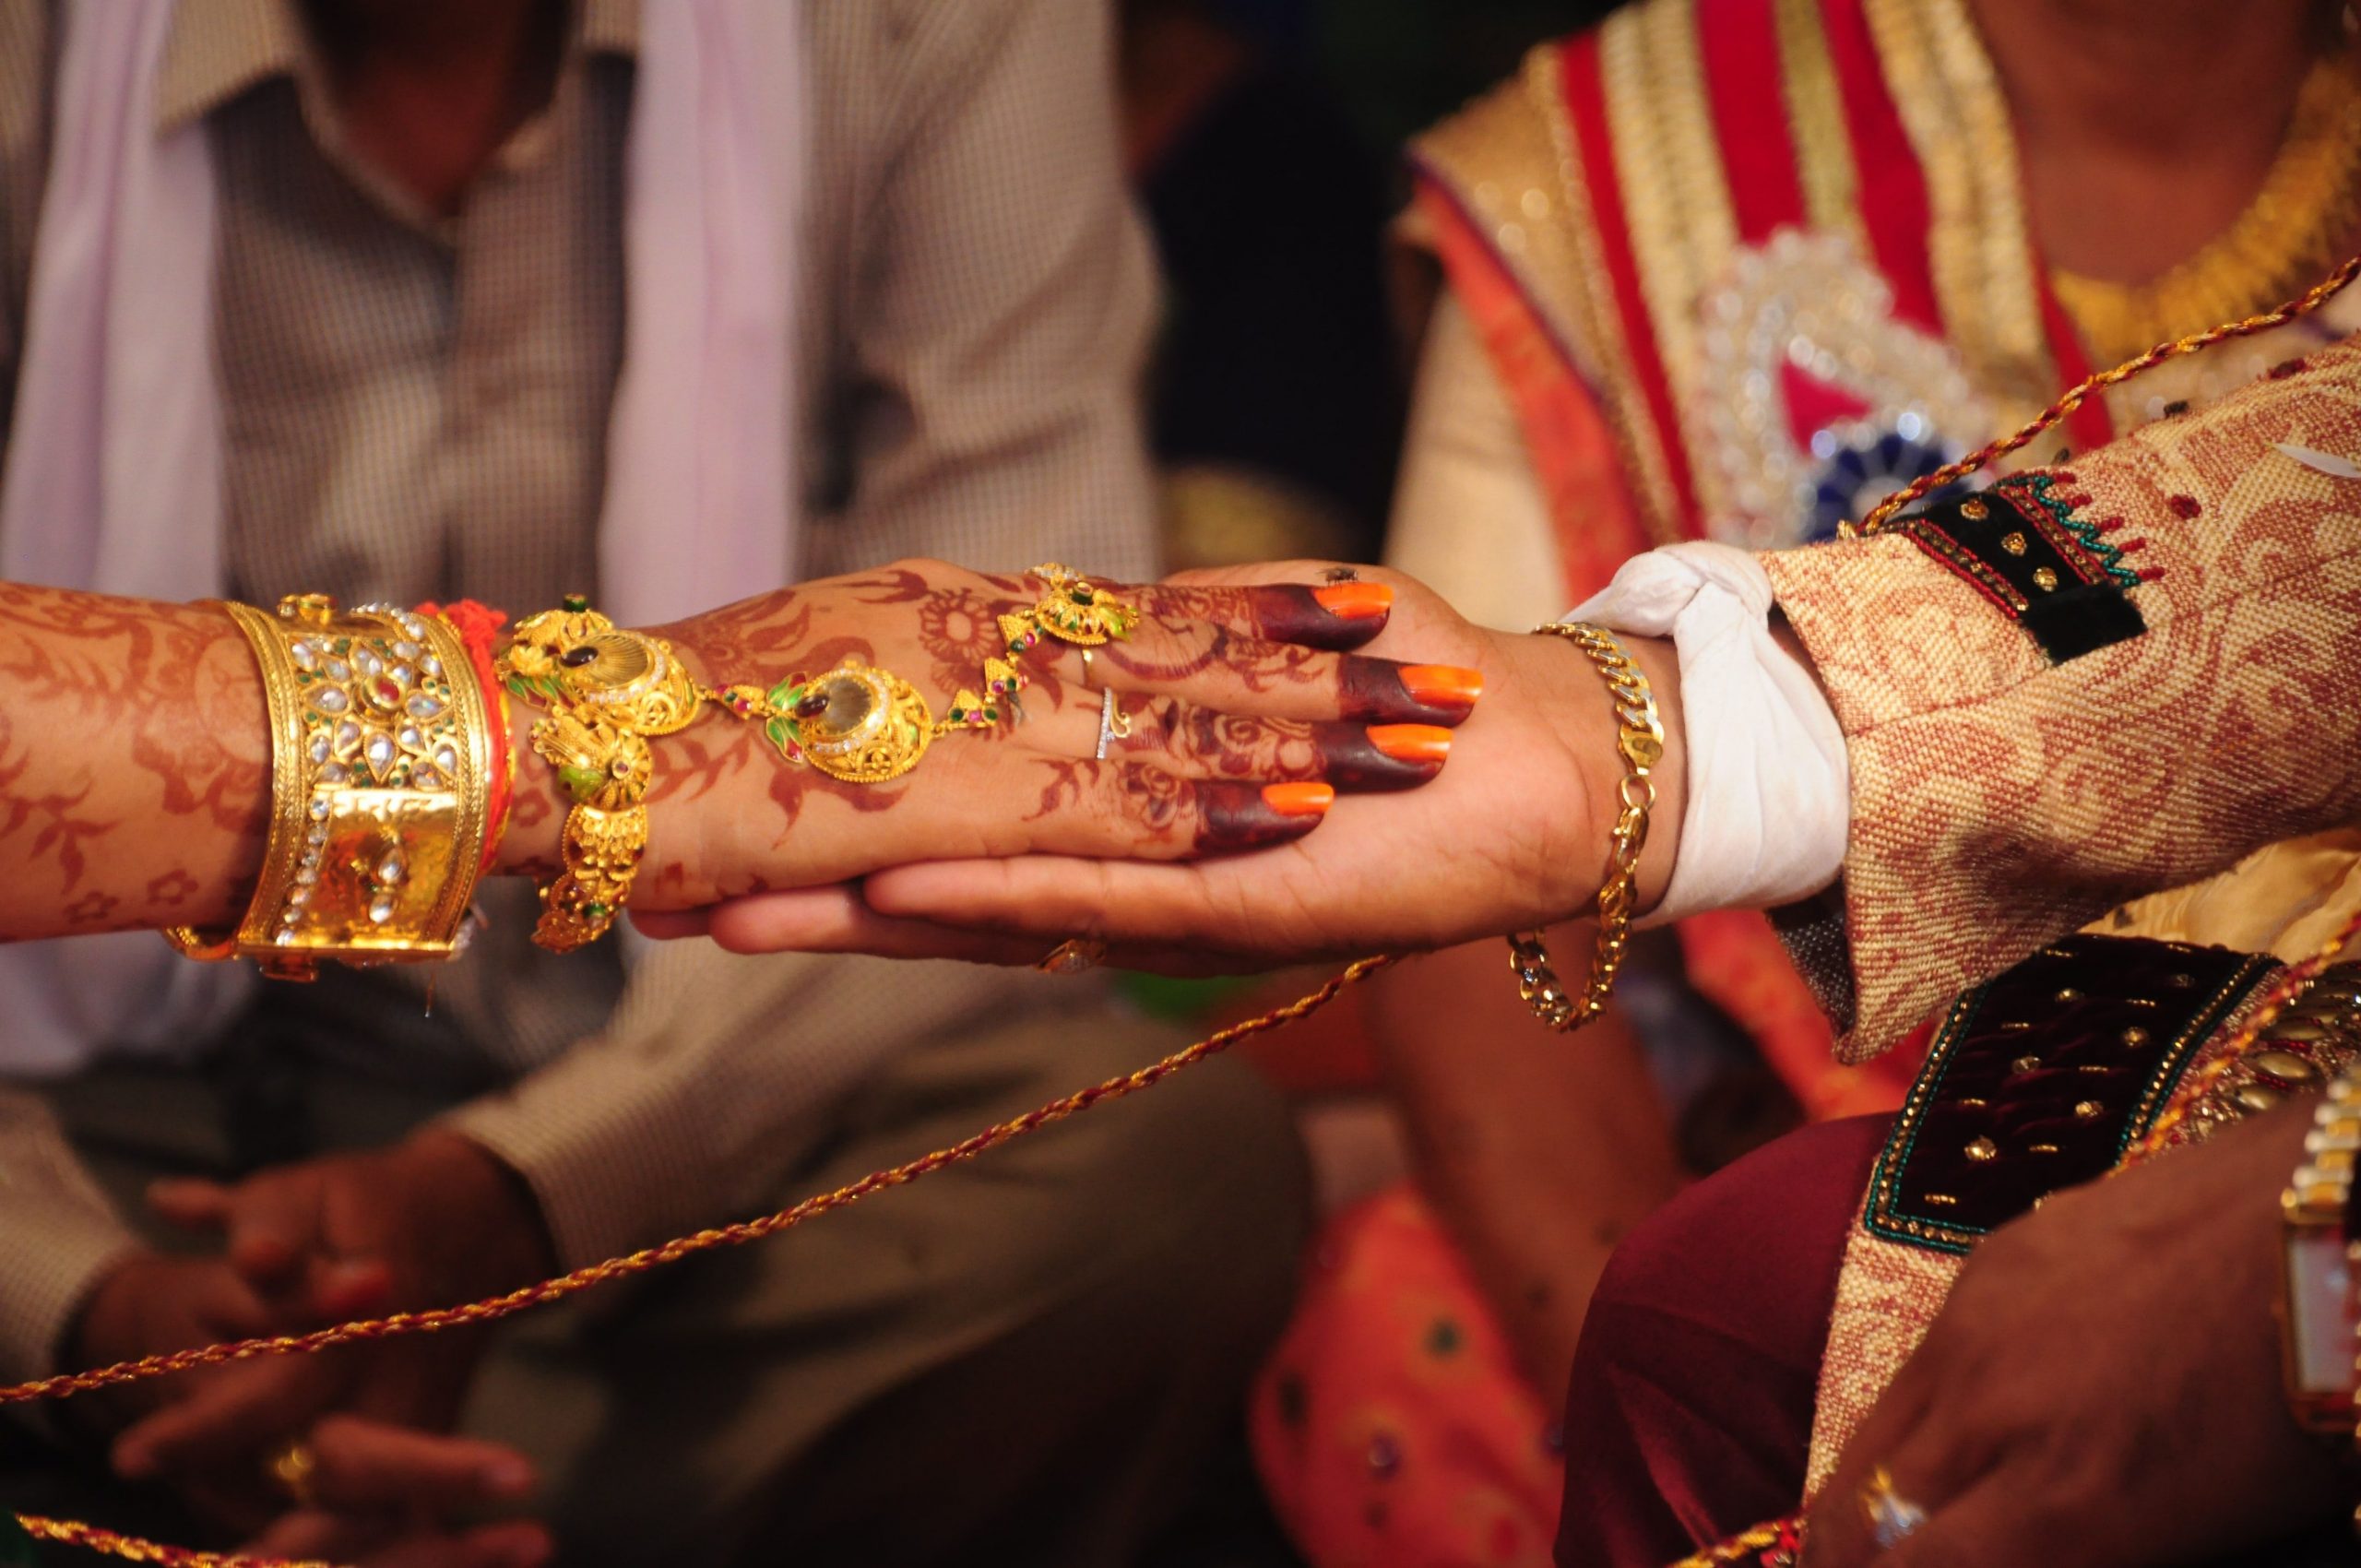 Cabinet clears proposal to raise minimum age of marriage for women from 18 to 21